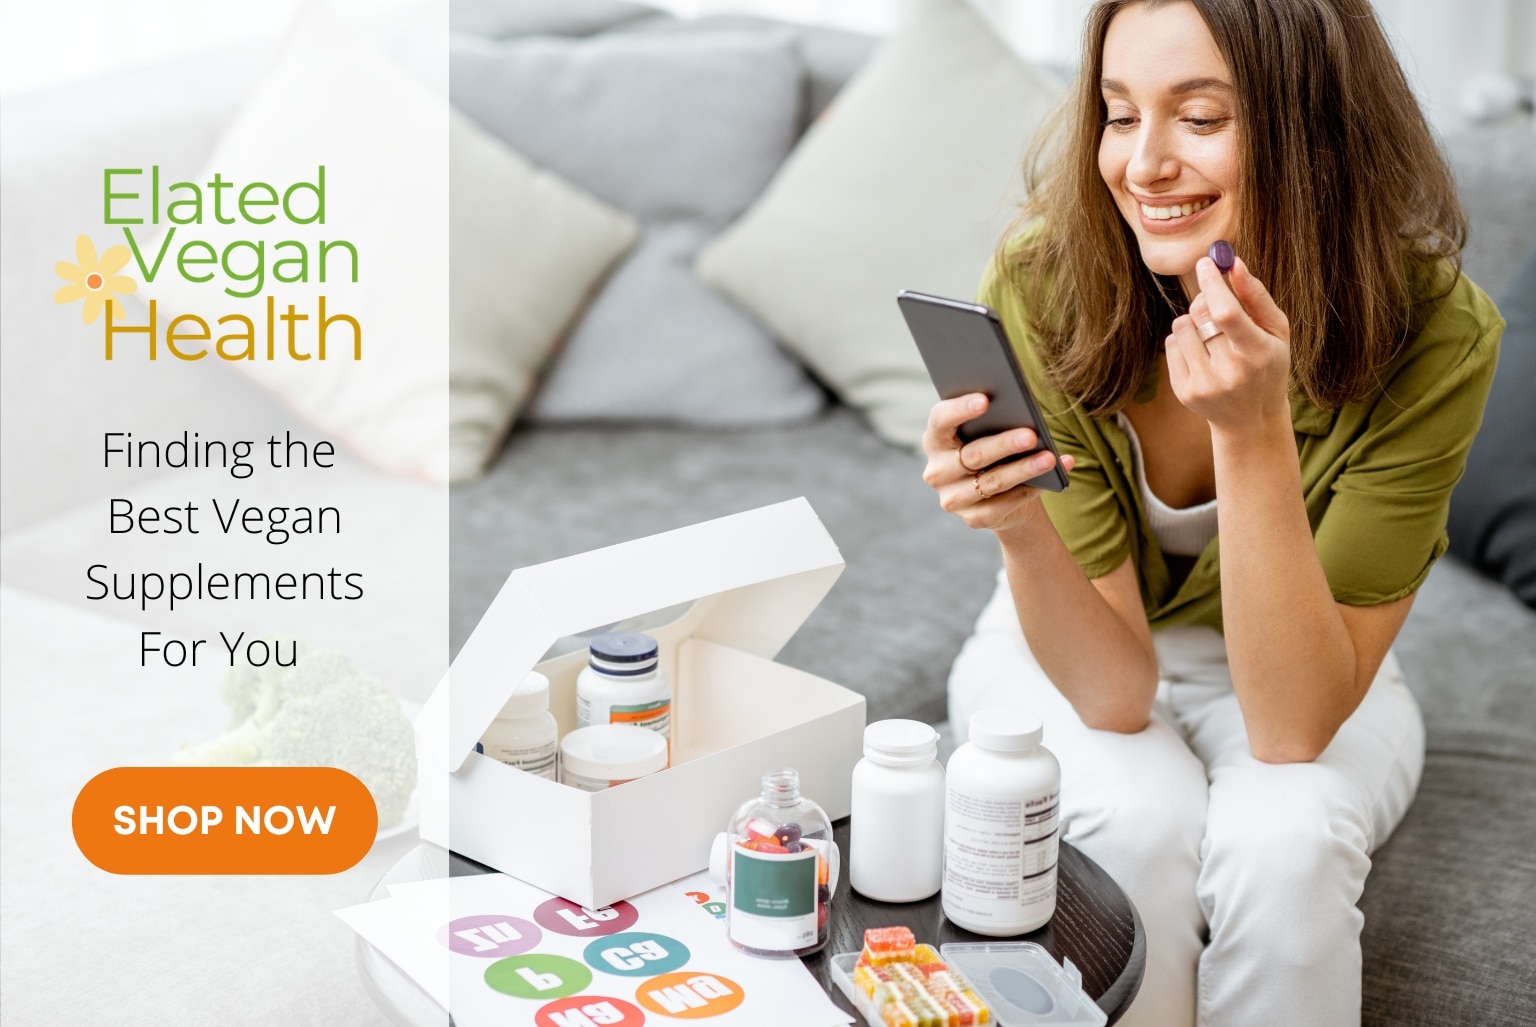 Elated vegan health - finding the best vegan supplements for you - woman choosing supplements